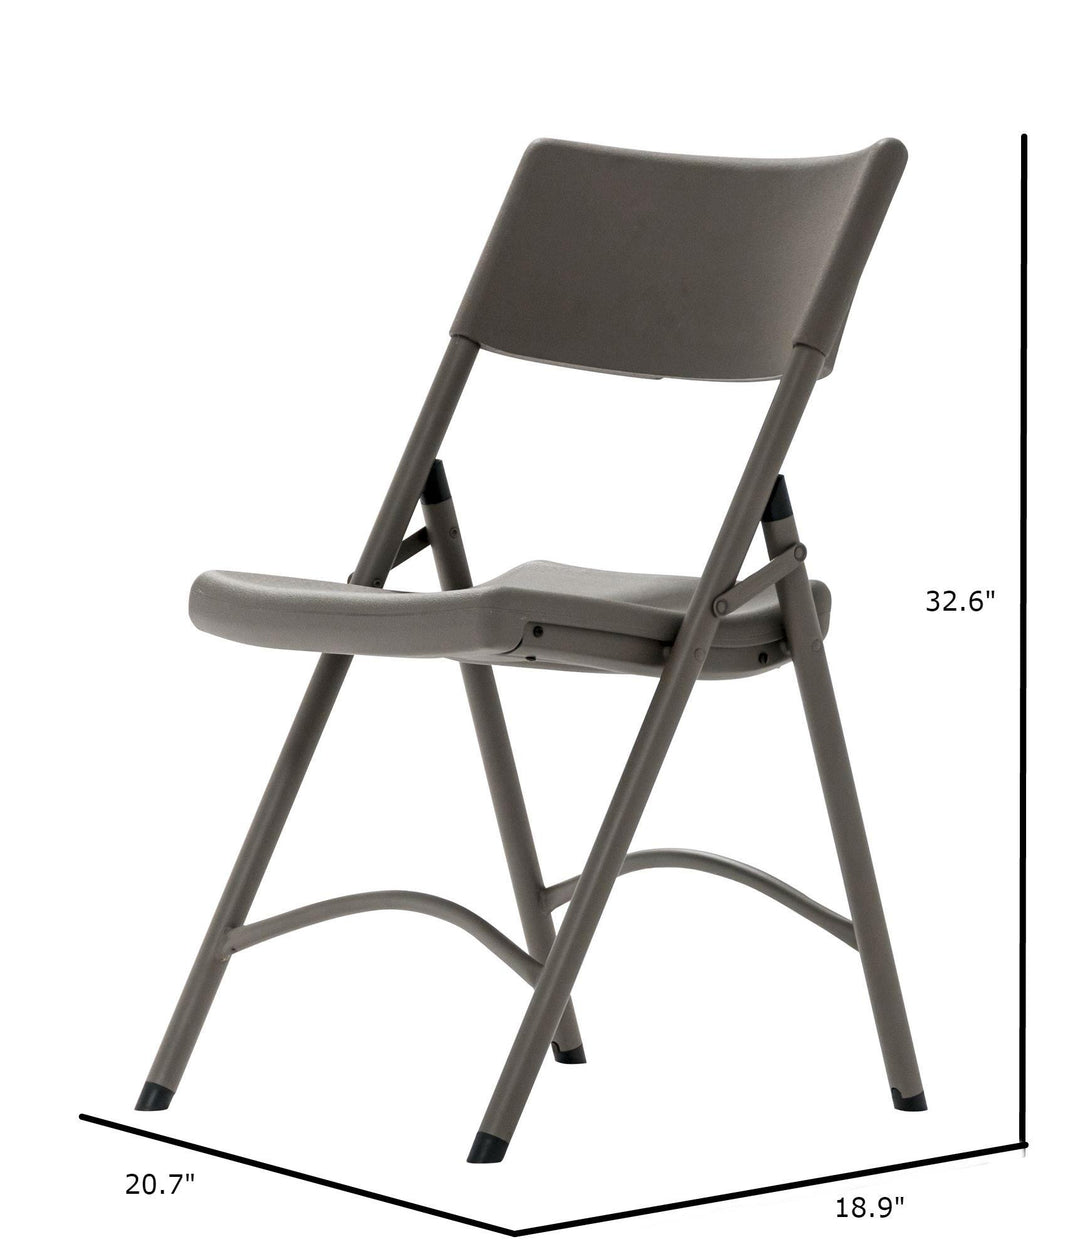 Folding chair for gatherings -  Brown - 4 Pack